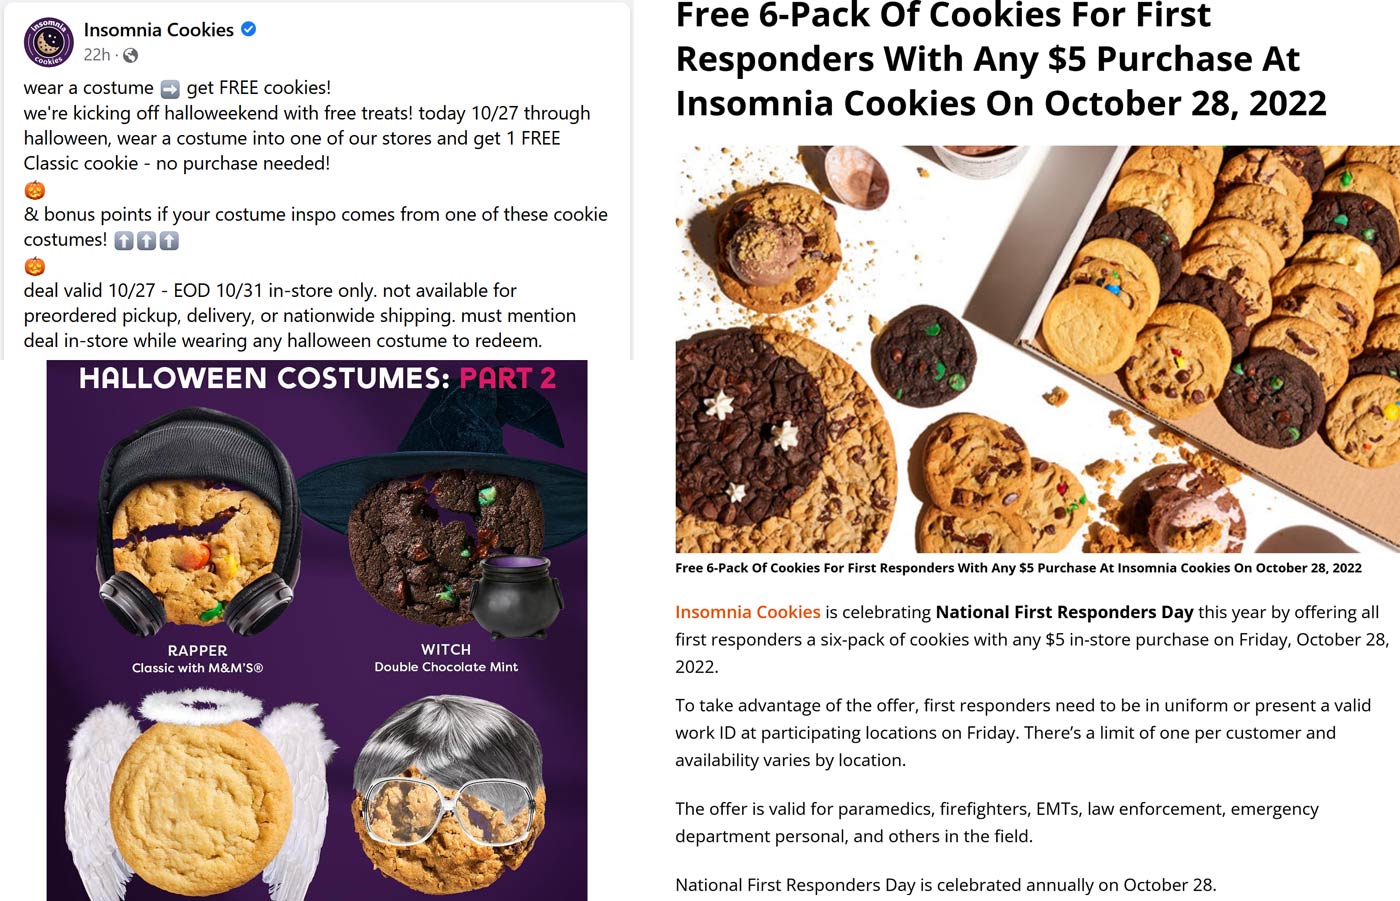 Insomnia Cookies restaurants Coupon  Free cookie in costume for all & free 6pk for first responders today at Insomnia Cookies #insomniacookies 